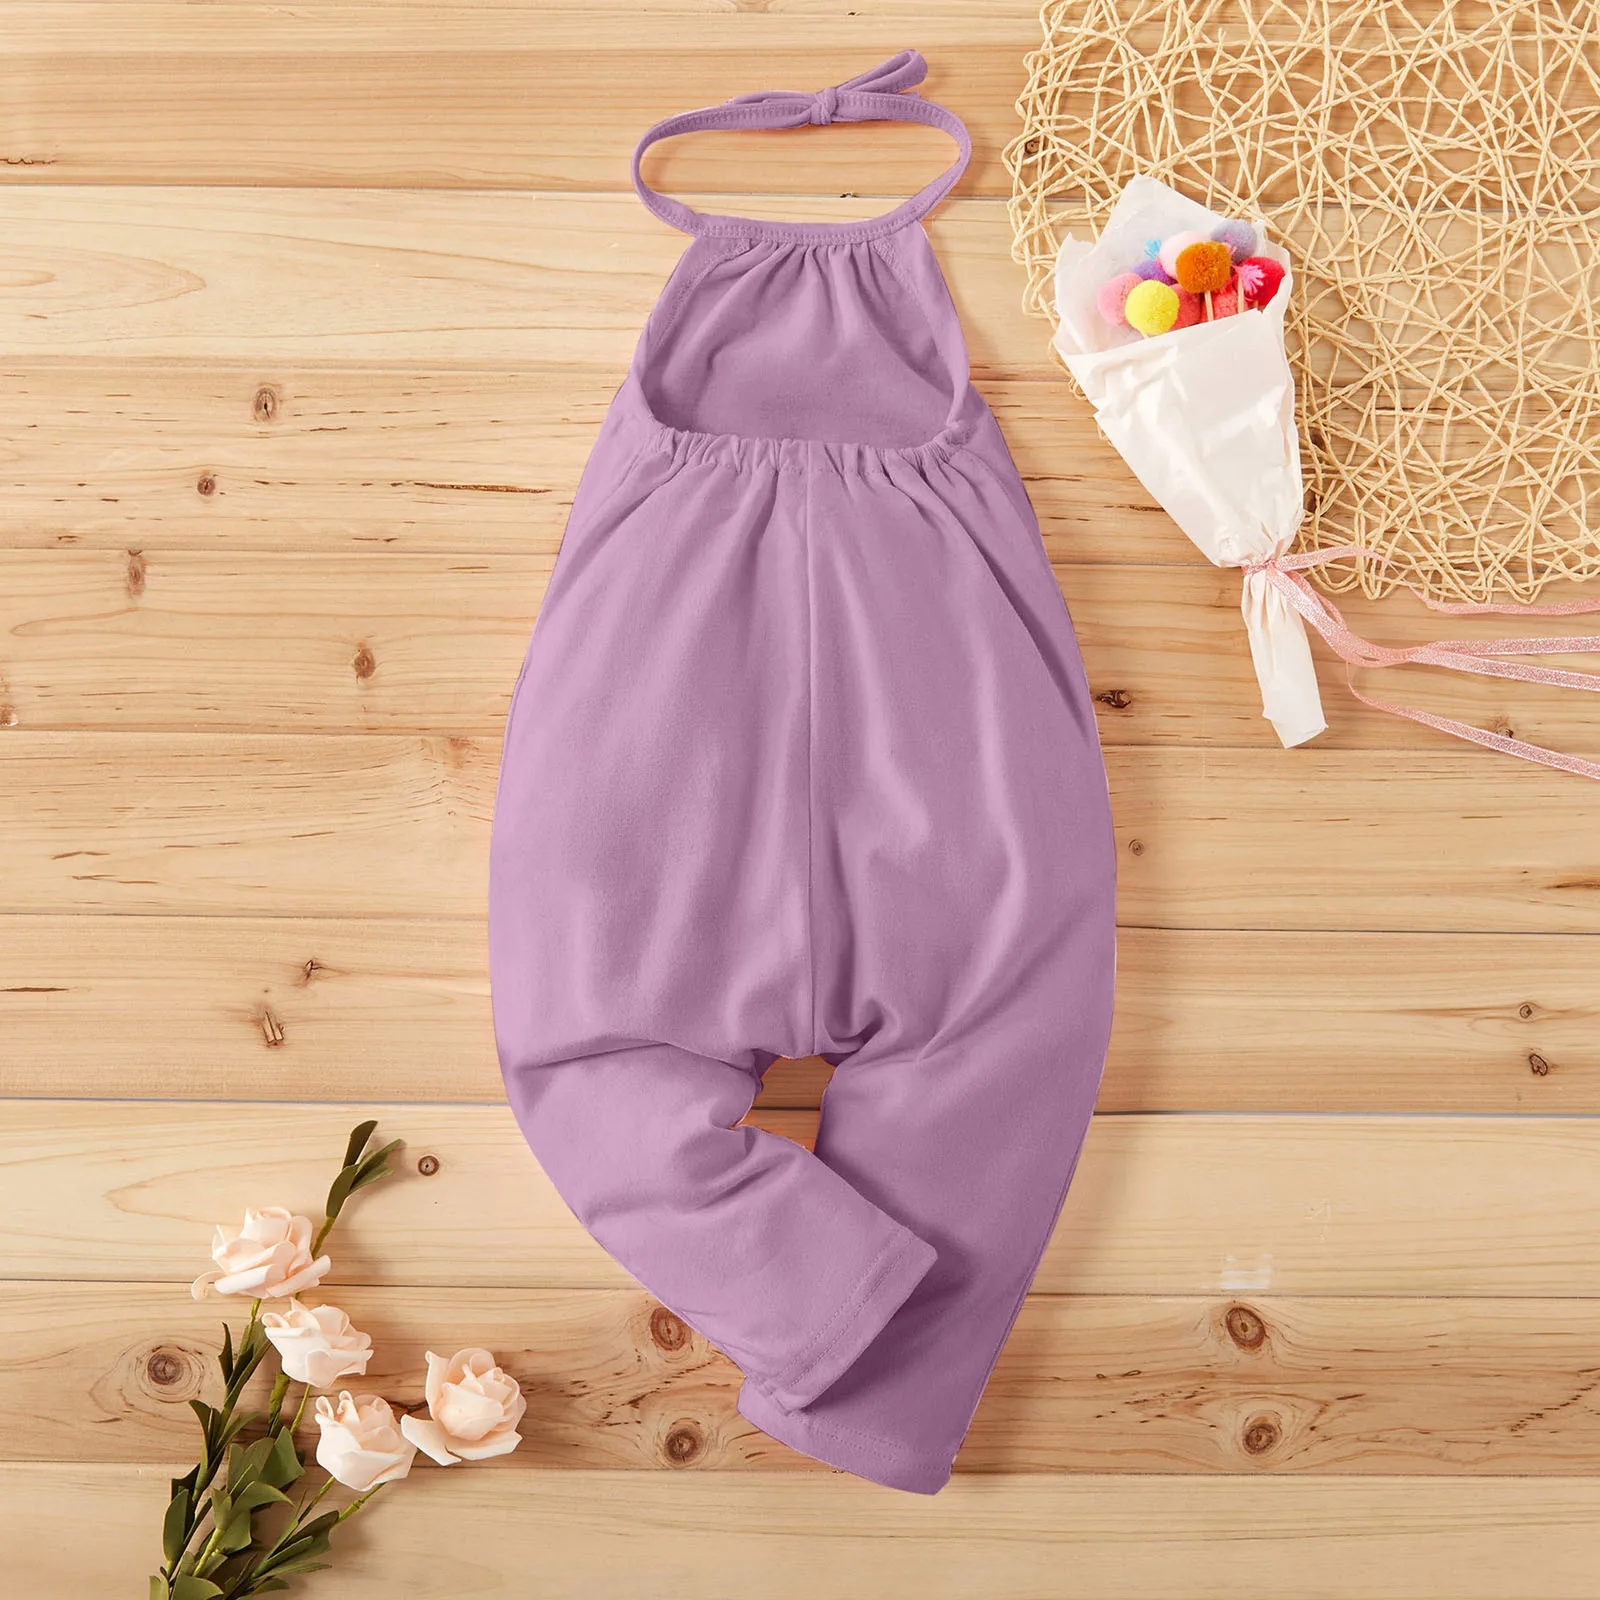 Cute Infant Baby Girls Romper Summer Girls Clothes 1-6 Year Kids Jumpsuits For Girls Backless Baby Romper Harem Pants Solid Color Clothes Kid Girls Jumpsuits carters baby bodysuits	